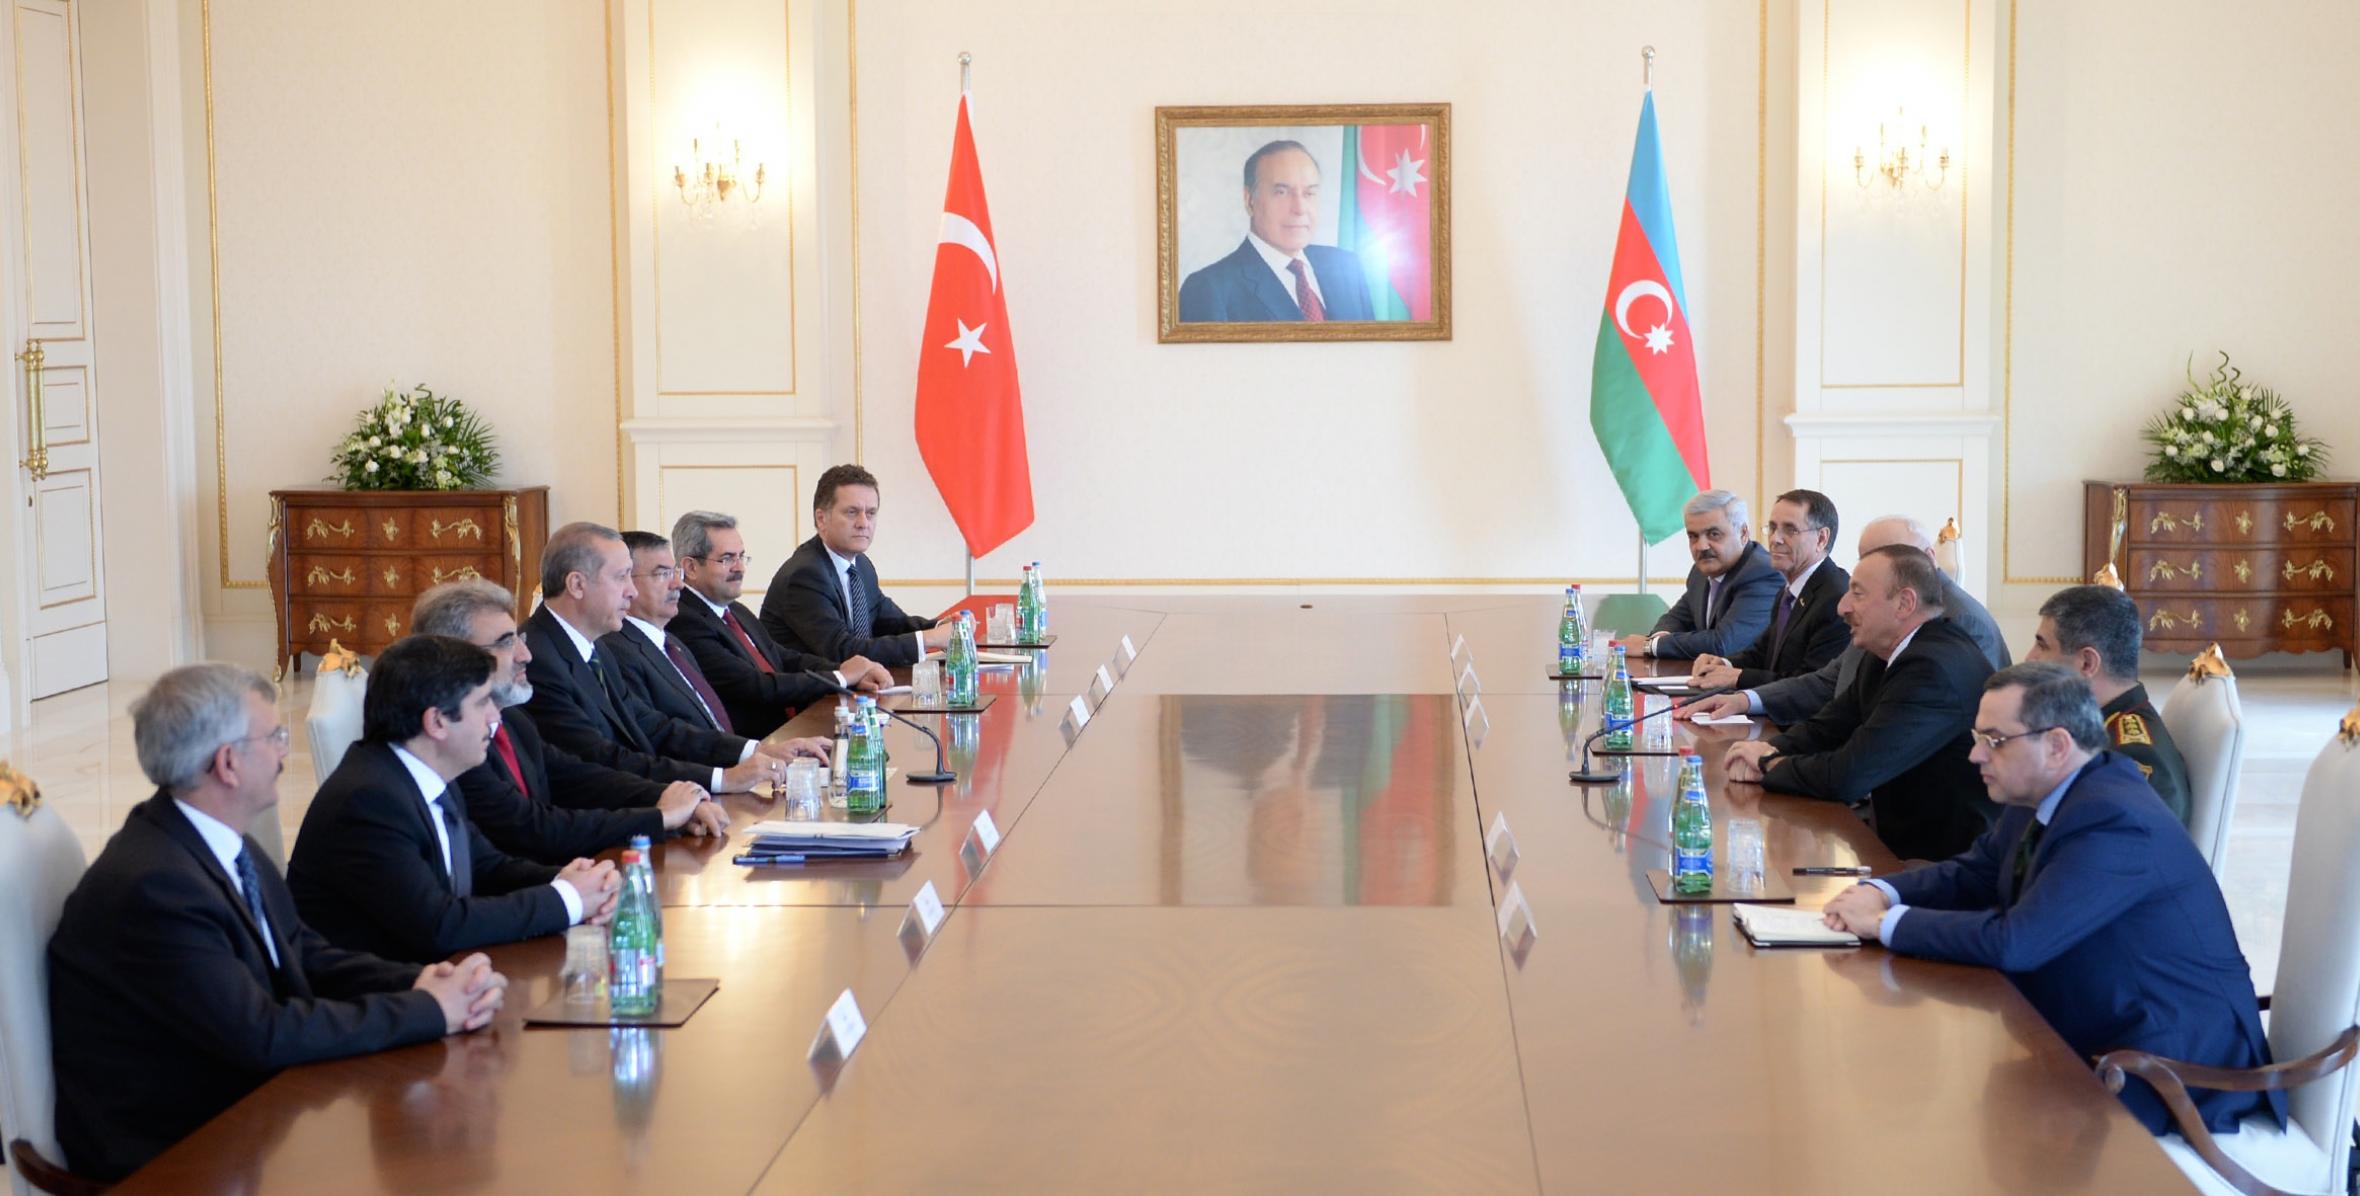 Ilham Aliyev and Prime Minister of the Republic of Turkey Recep Tayyip Erdogan had a meeting in an expanded format with the participation of delegations